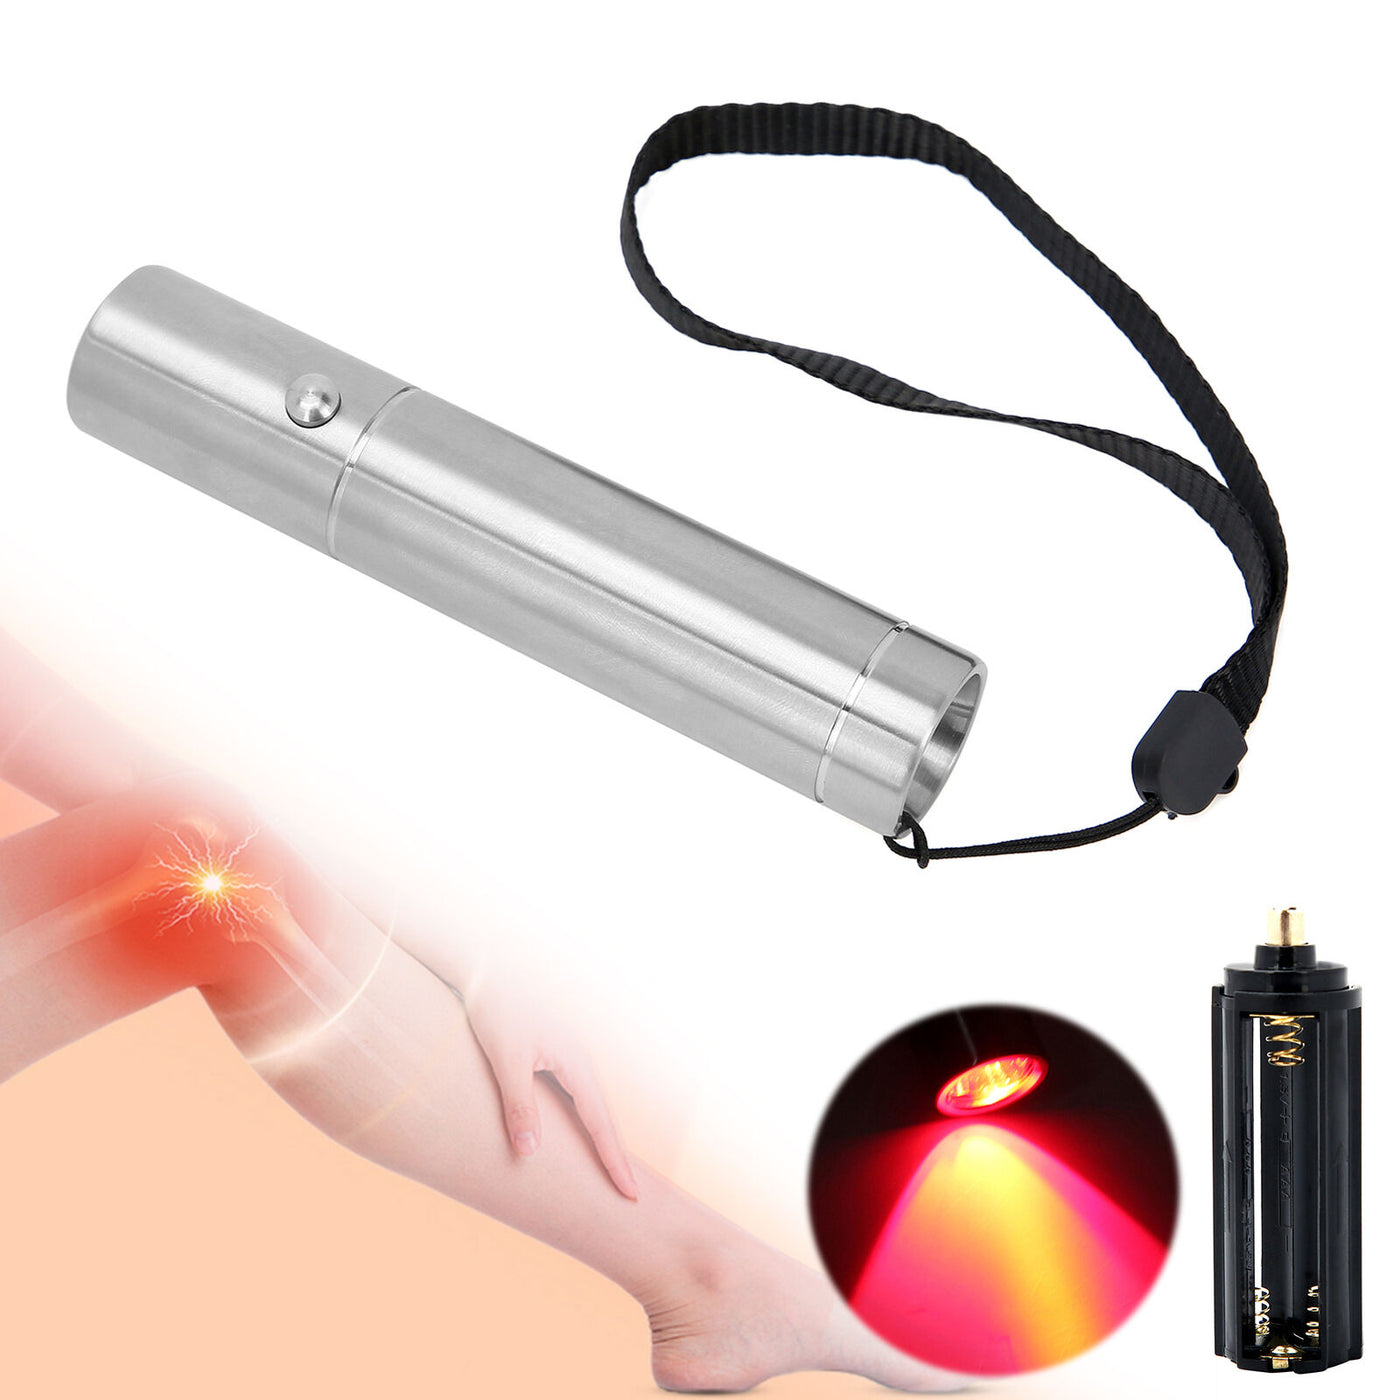 Infrared Light Therapy Device For Pain Relief